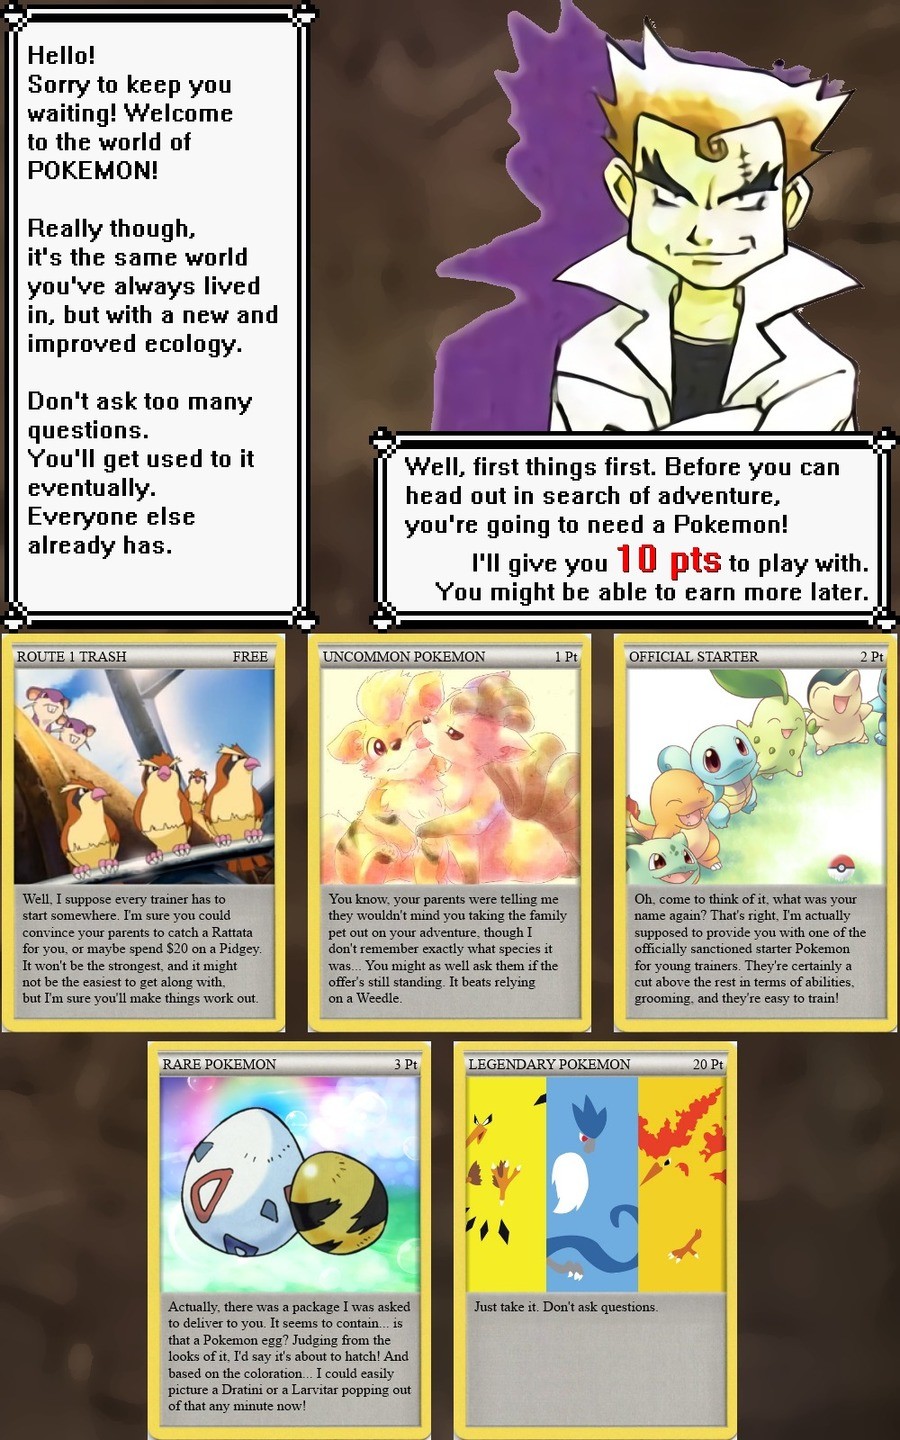 Weird Pokemon Cyoa. . Hellno Sorry tn keep ‘gnu waiting! tn the world at POKEMON! Really though, it' s the same world ymu' always lived in, but with a new and i